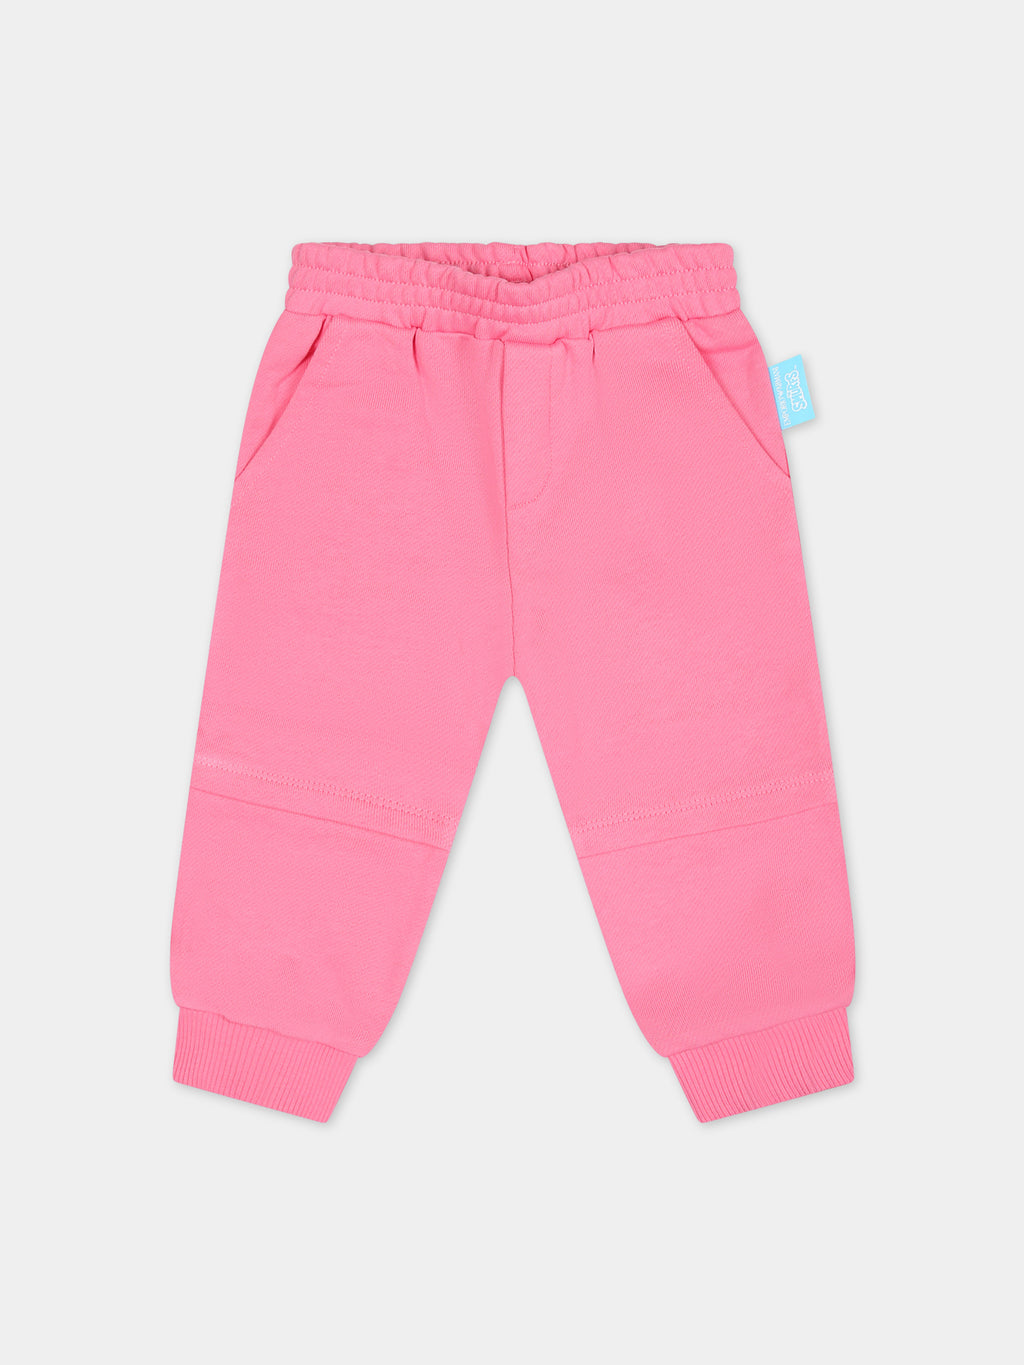 Pink sports trousers for baby girl with The Smurfs